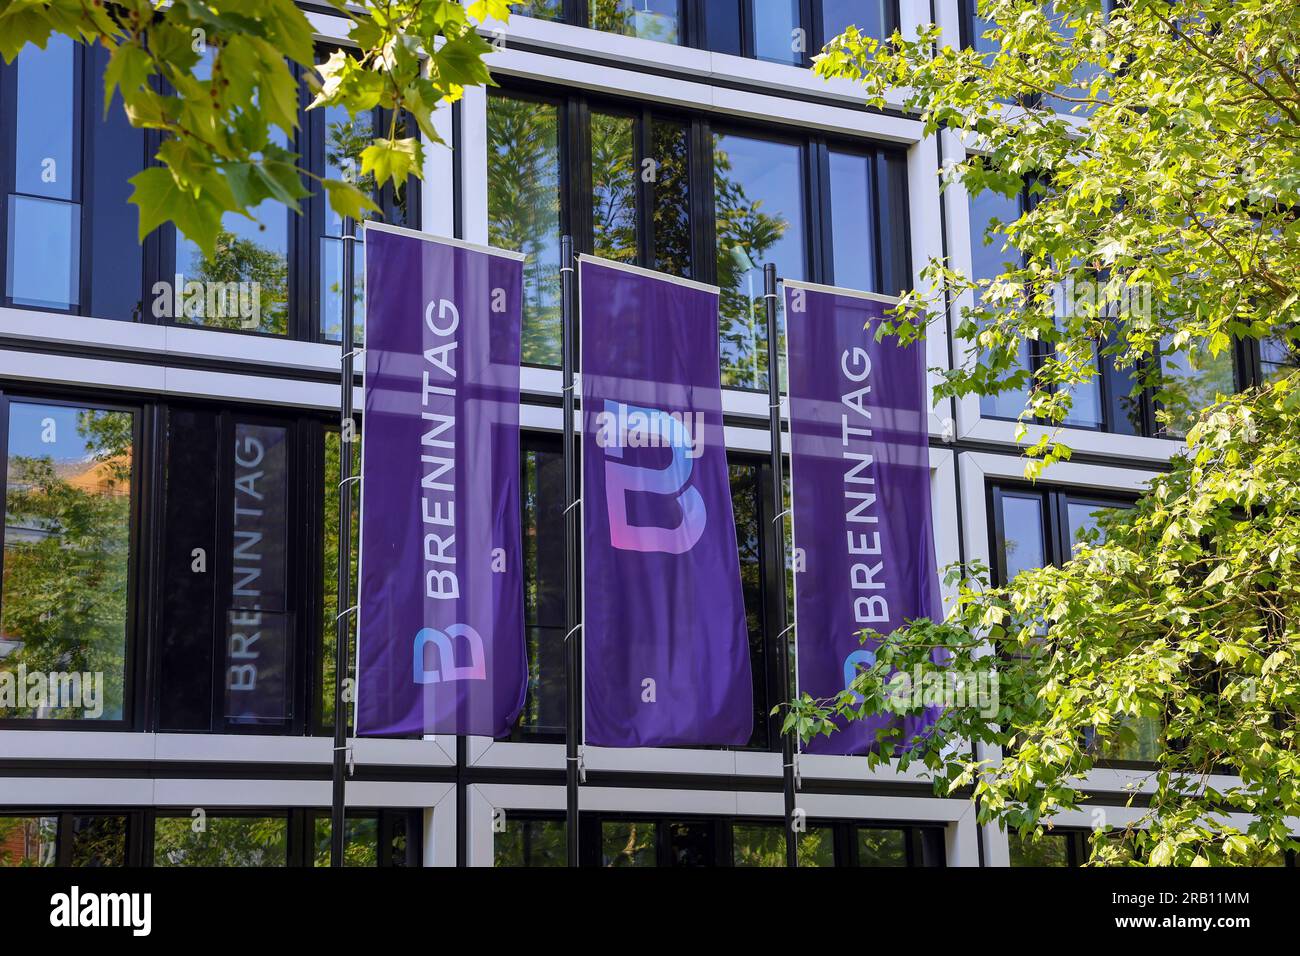 Essen, North Rhine-Westphalia, Germany - Brenntag, company logo on flags in front of the facade of the Brenntag headquarters, the company is the world market leader in the distribution of chemicals and ingredients Stock Photo